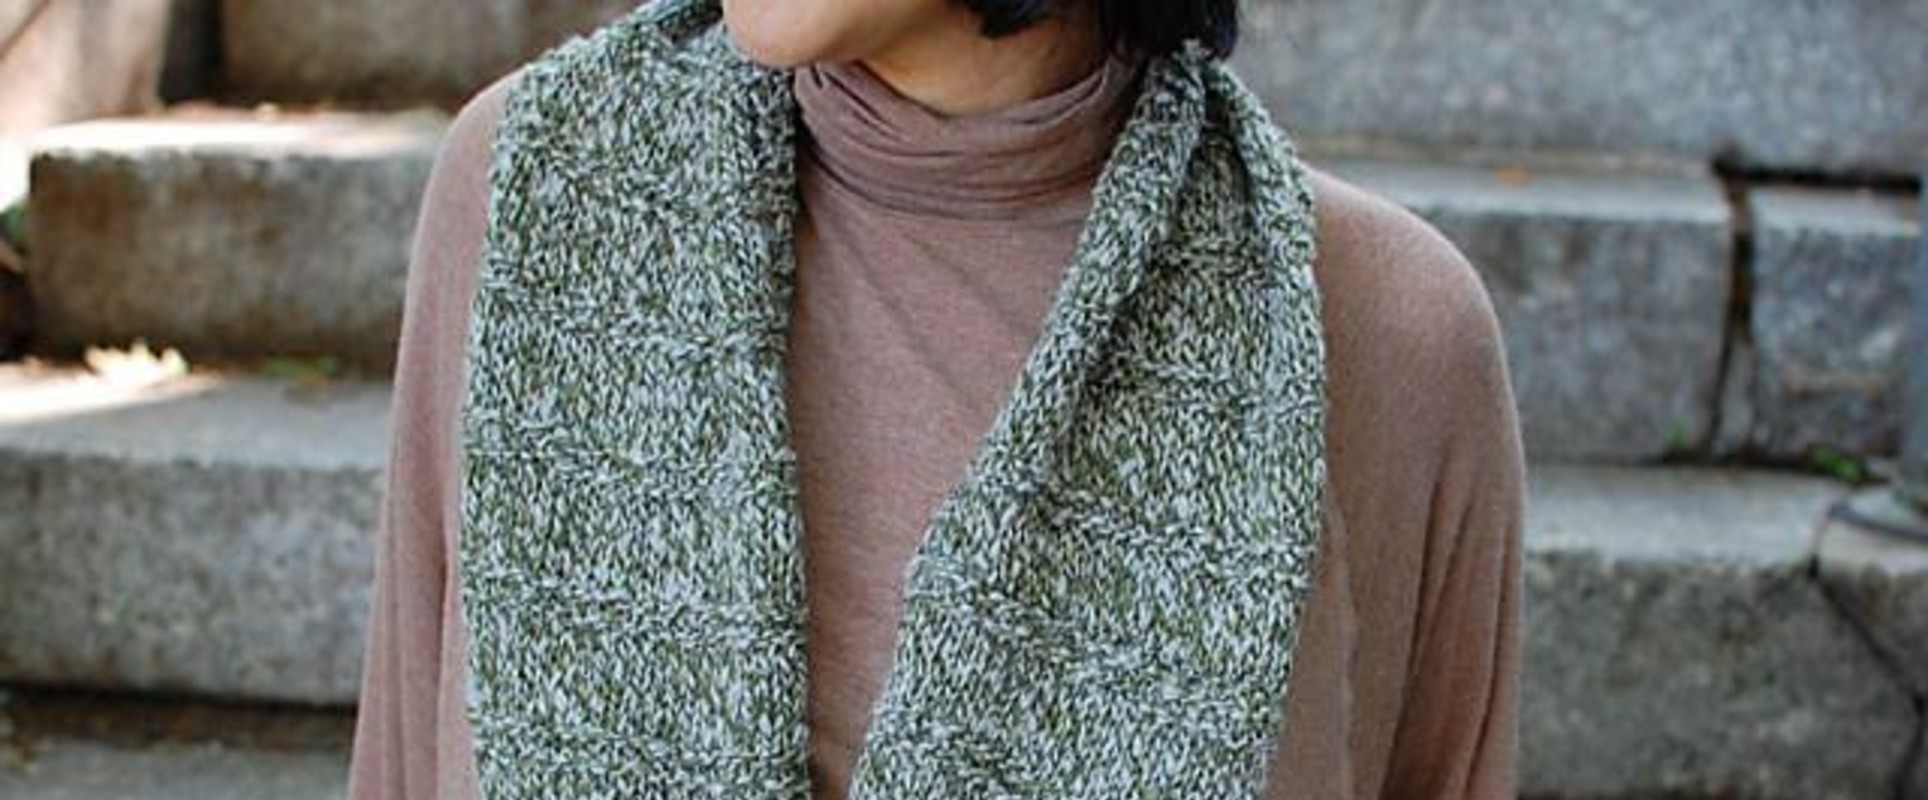 7 infinity scarf knitting patterns - 2 FREE patterns! | LoveCrafts